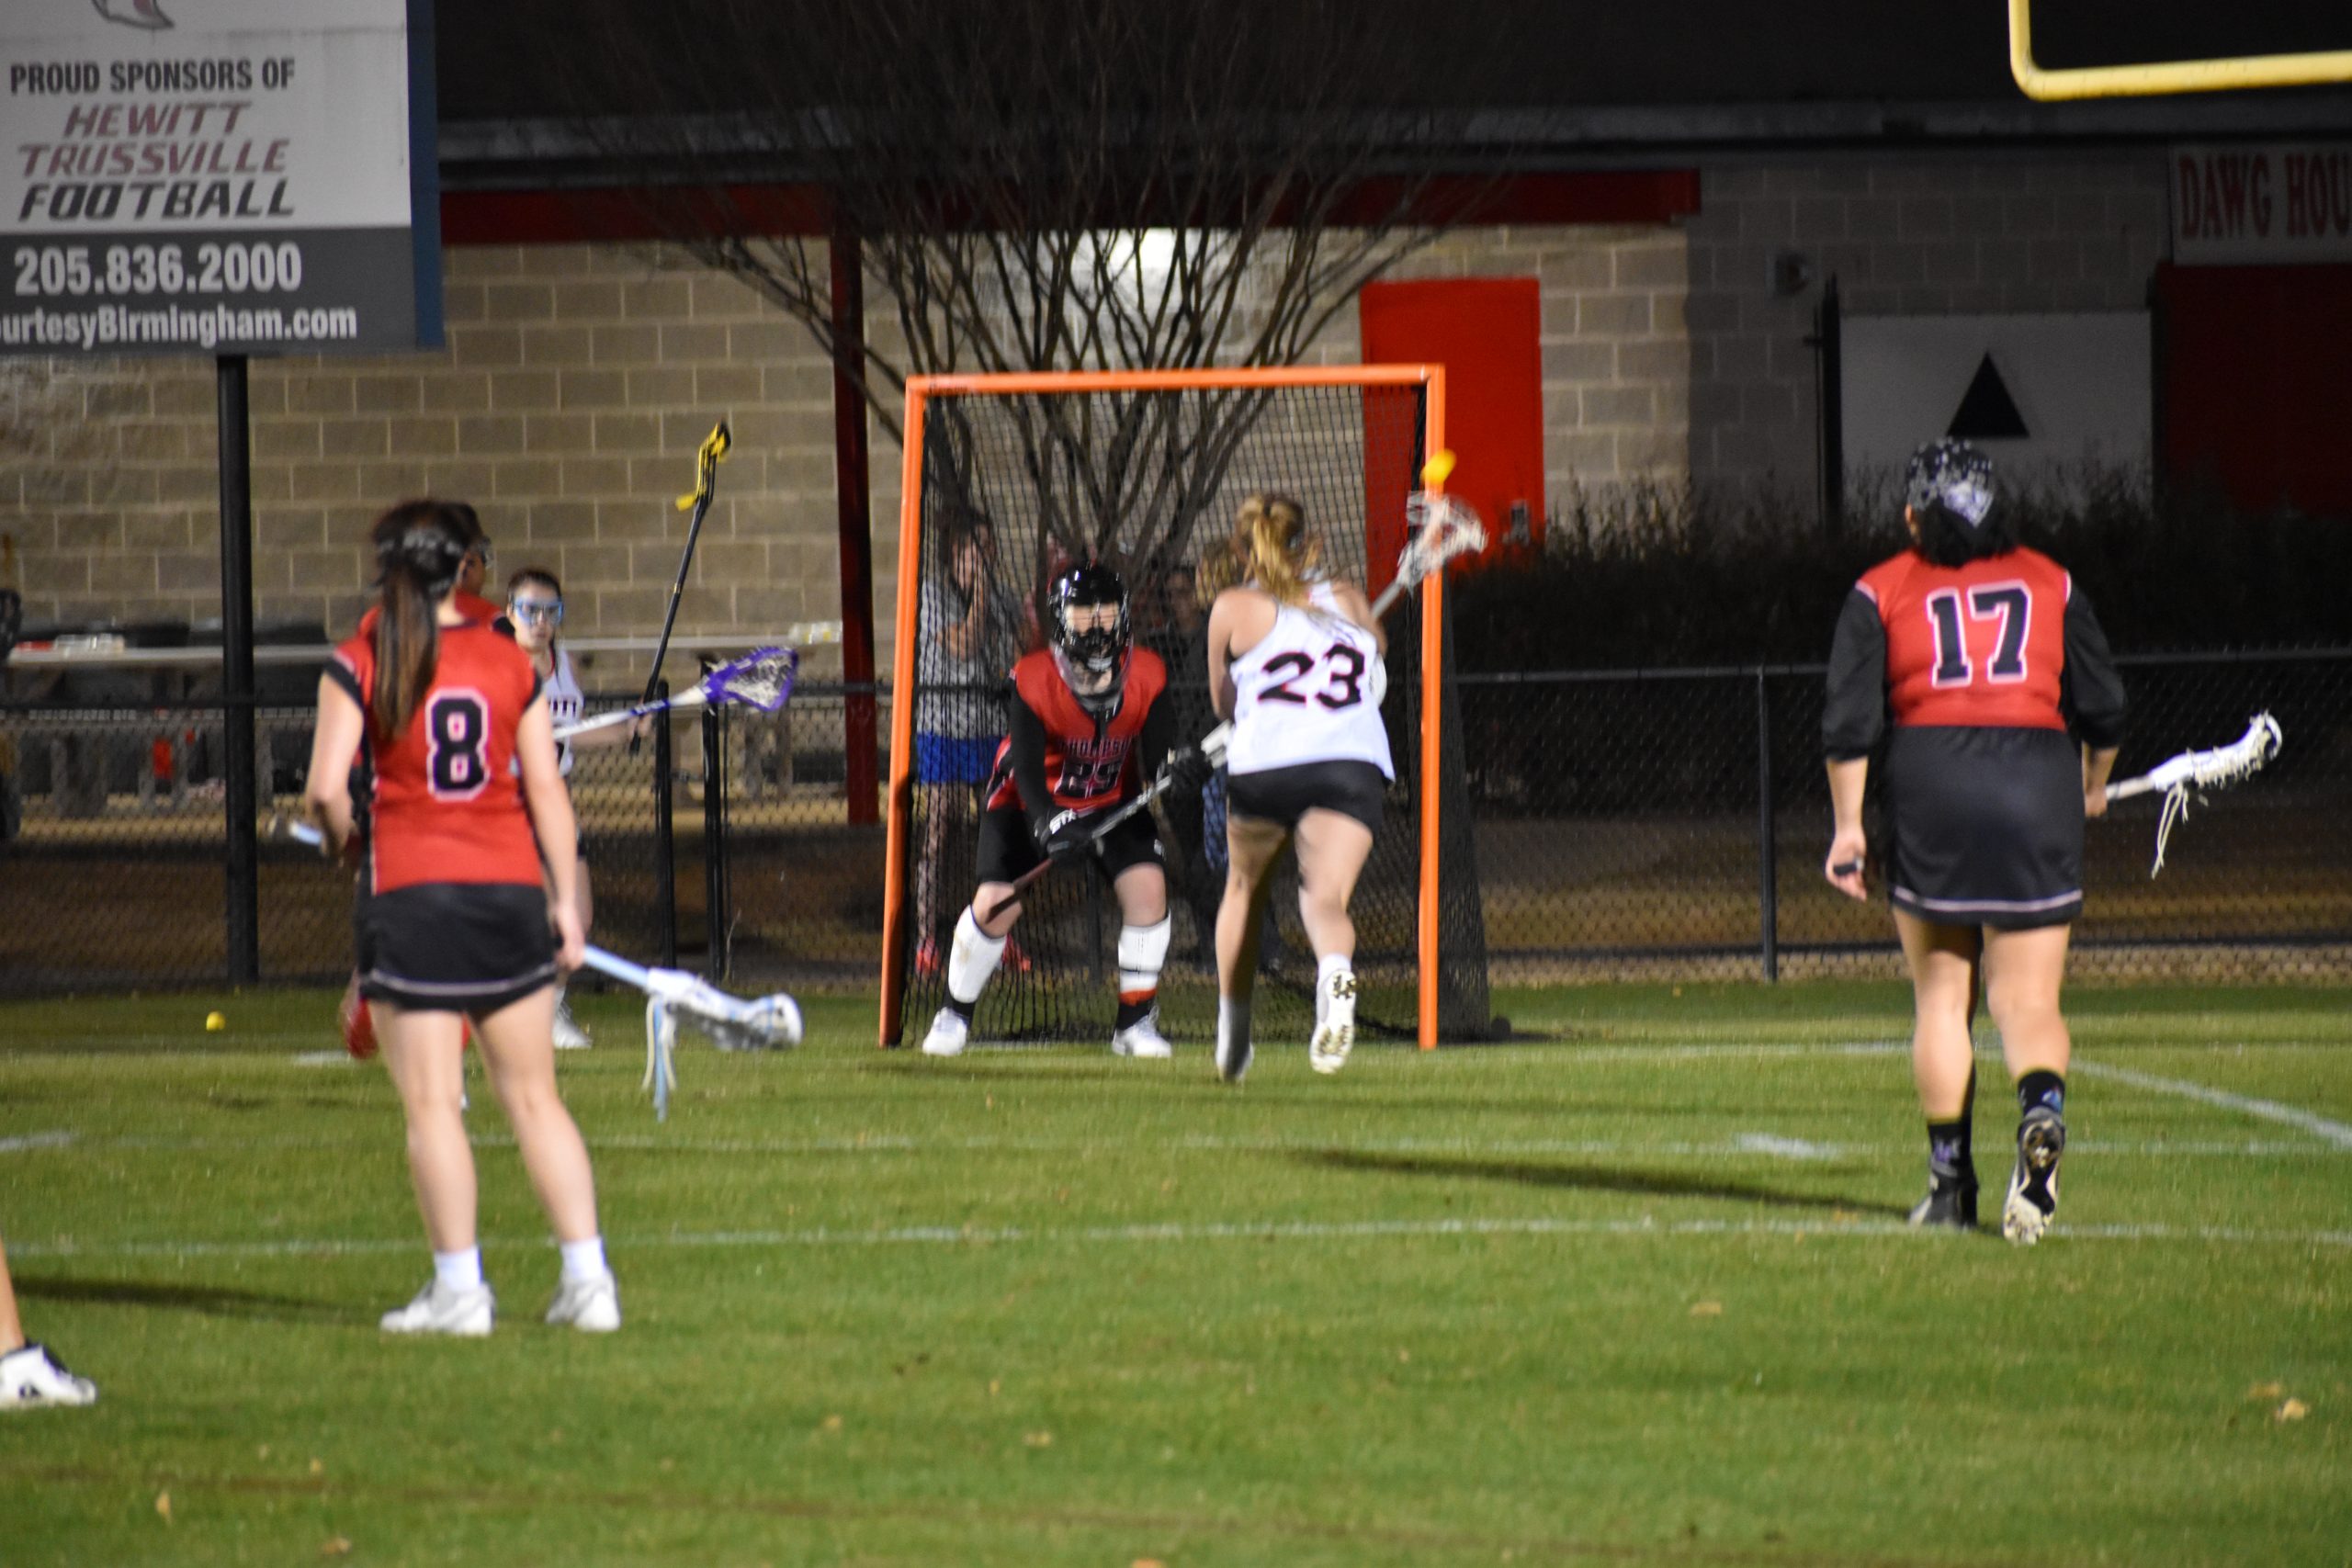 Hewitt Trussville Youth Lacrosse to hold LAX DAY this Sunday